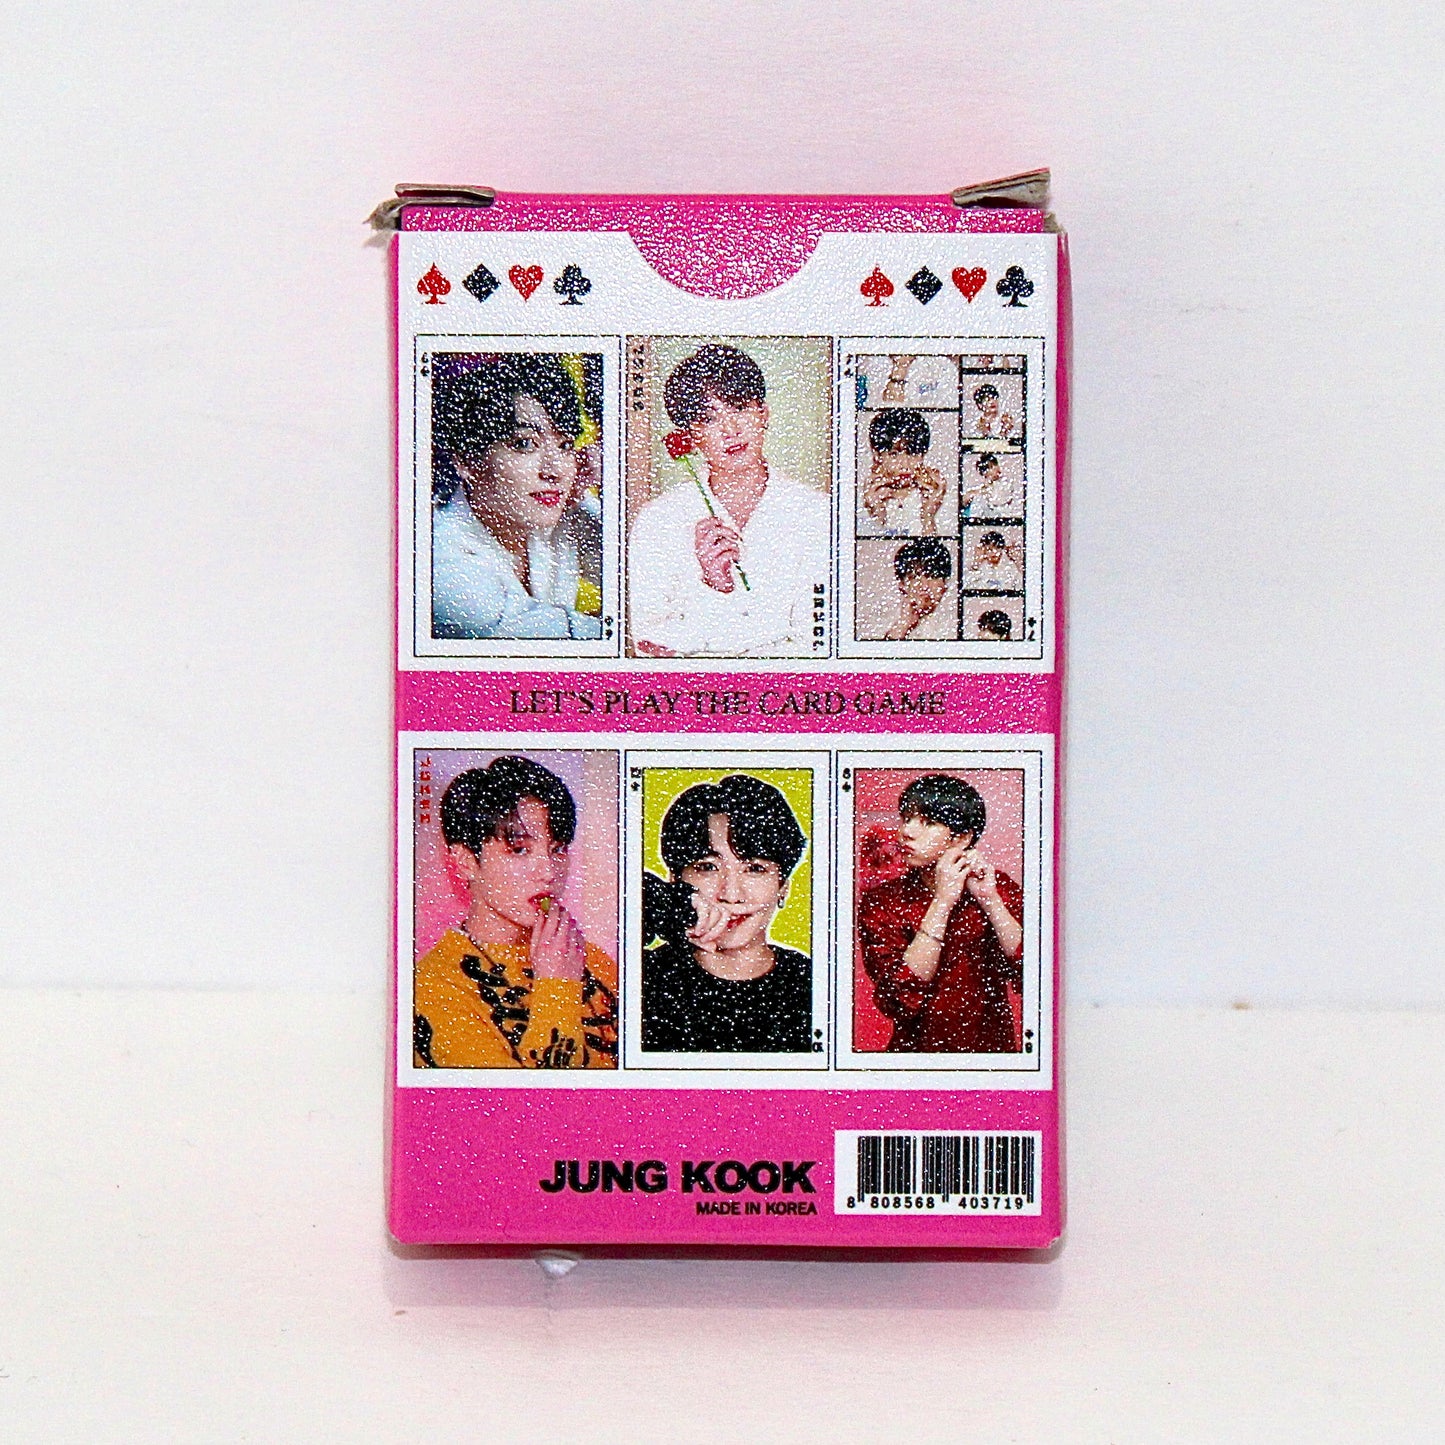 BTS Jungkook Unofficial Playing Card Deck